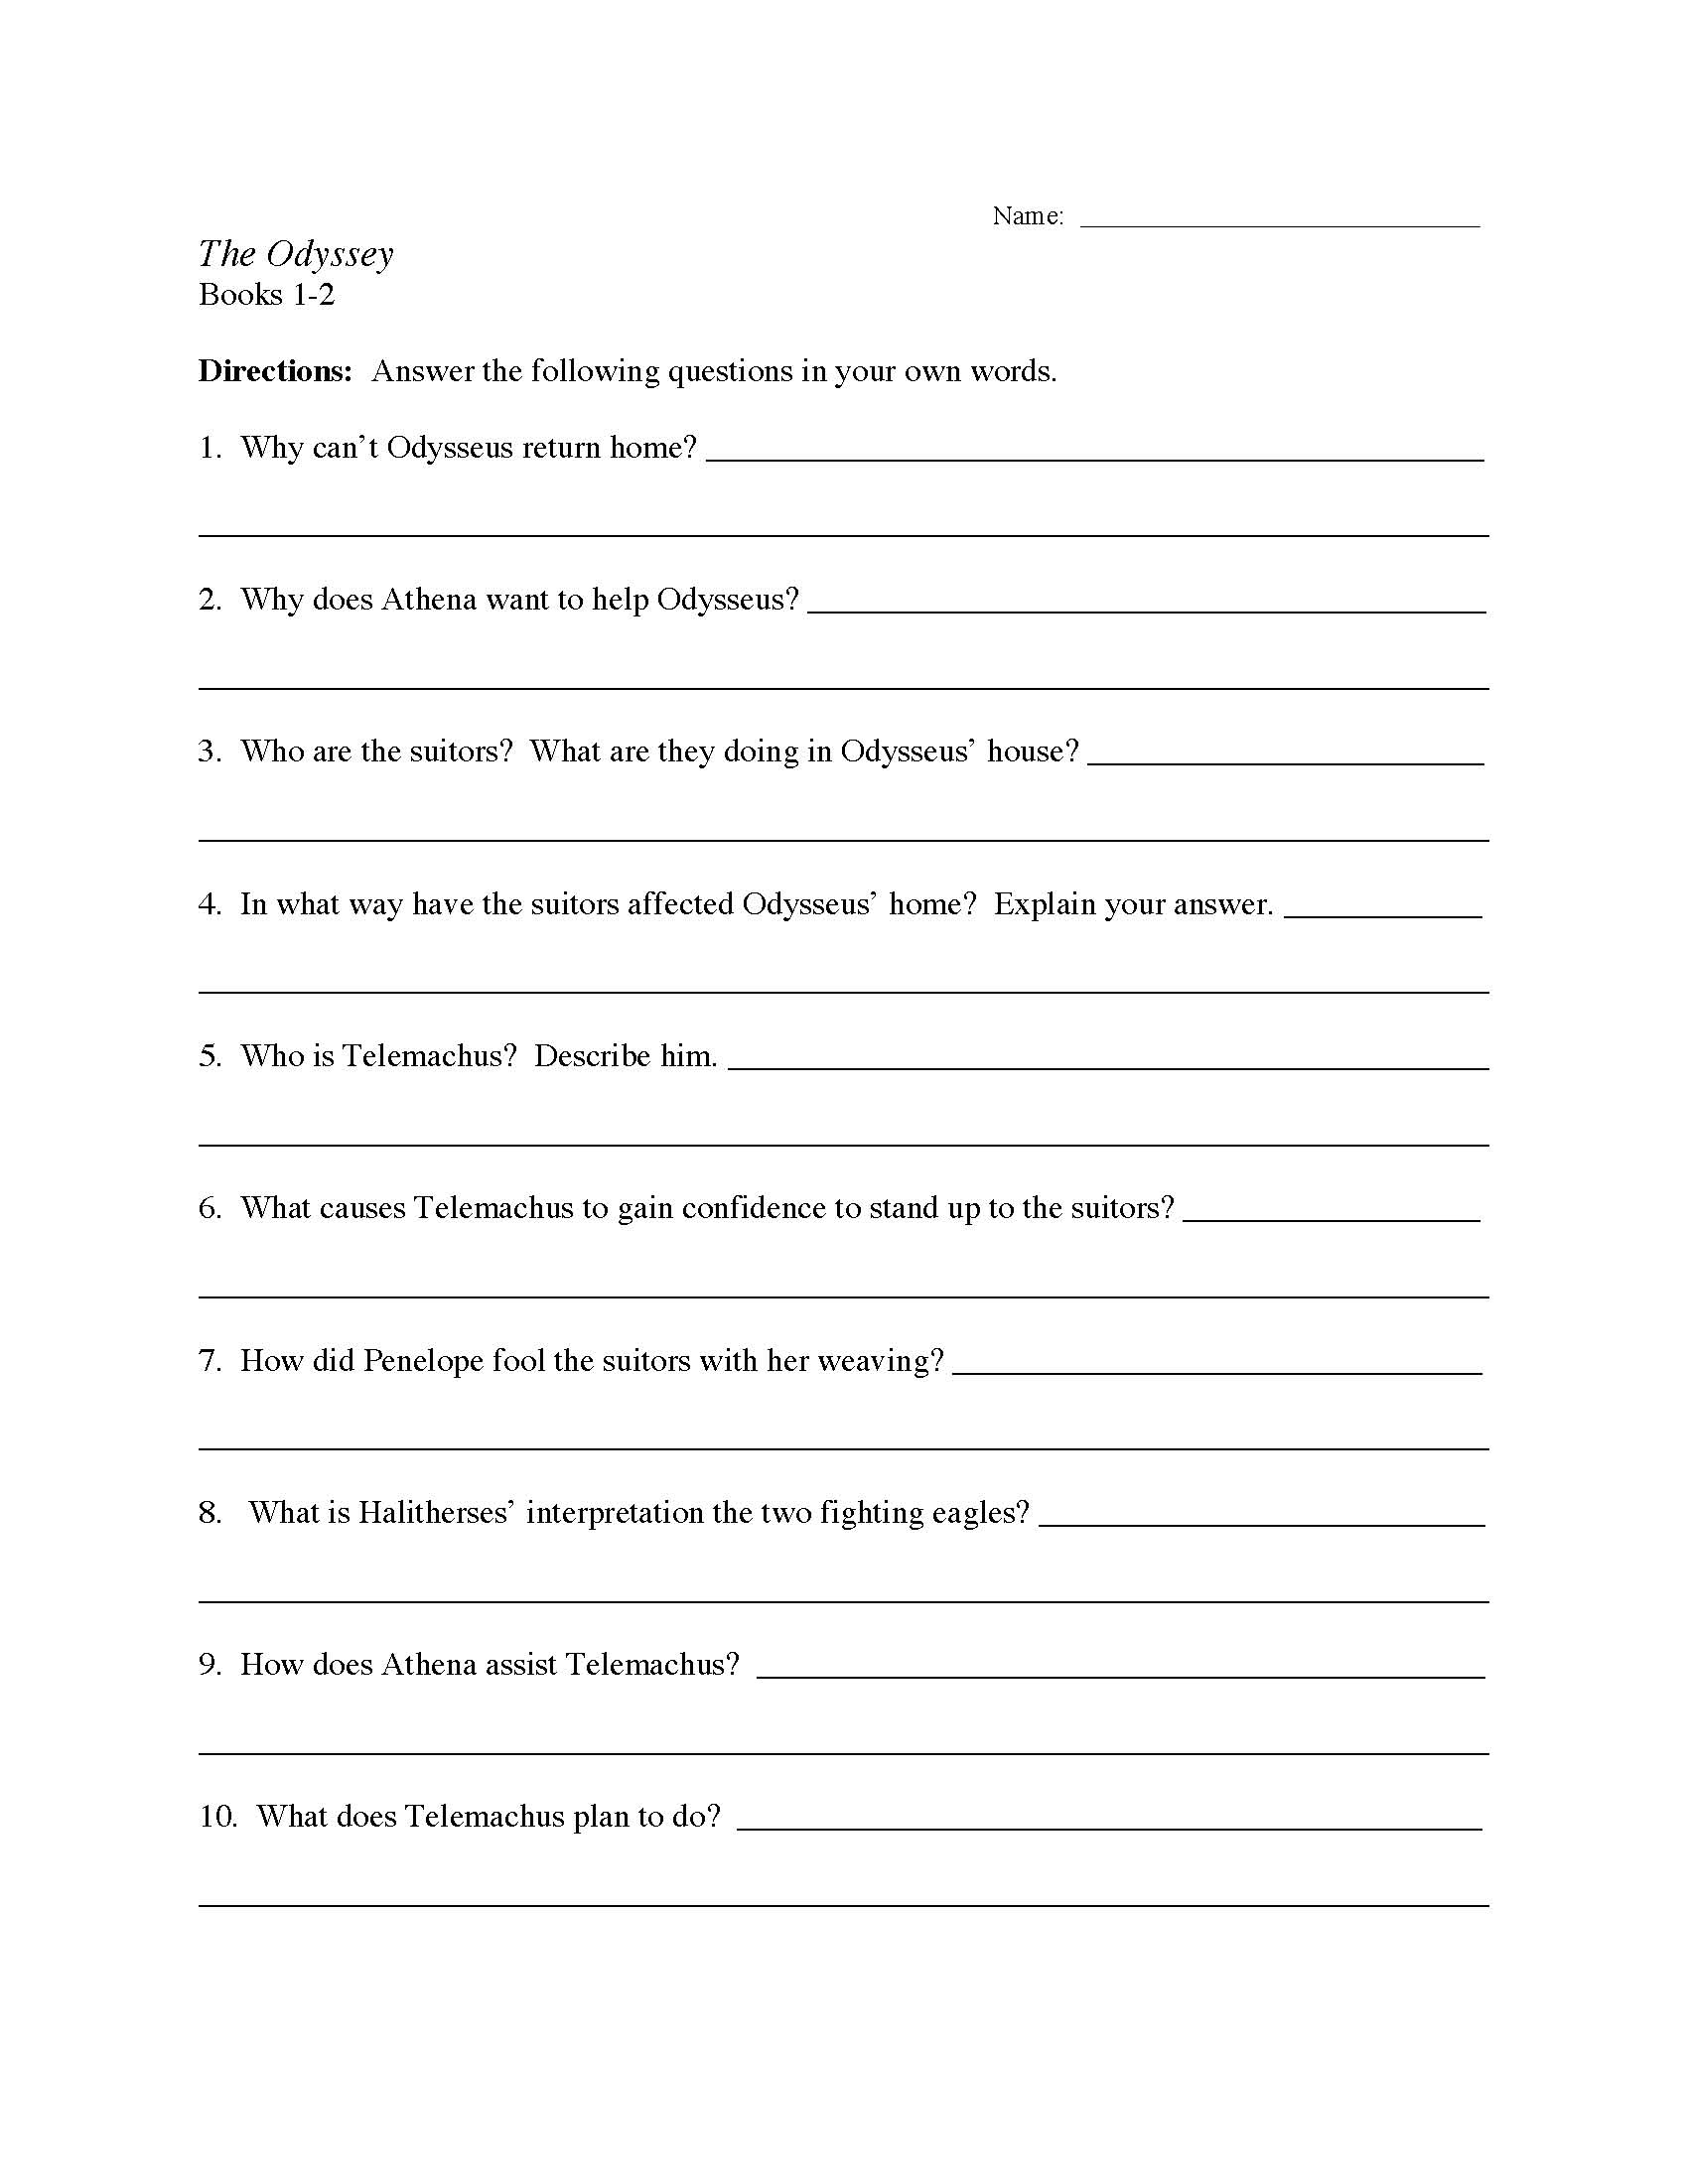 the-odyssey-chapters-1-2-worksheet-preview